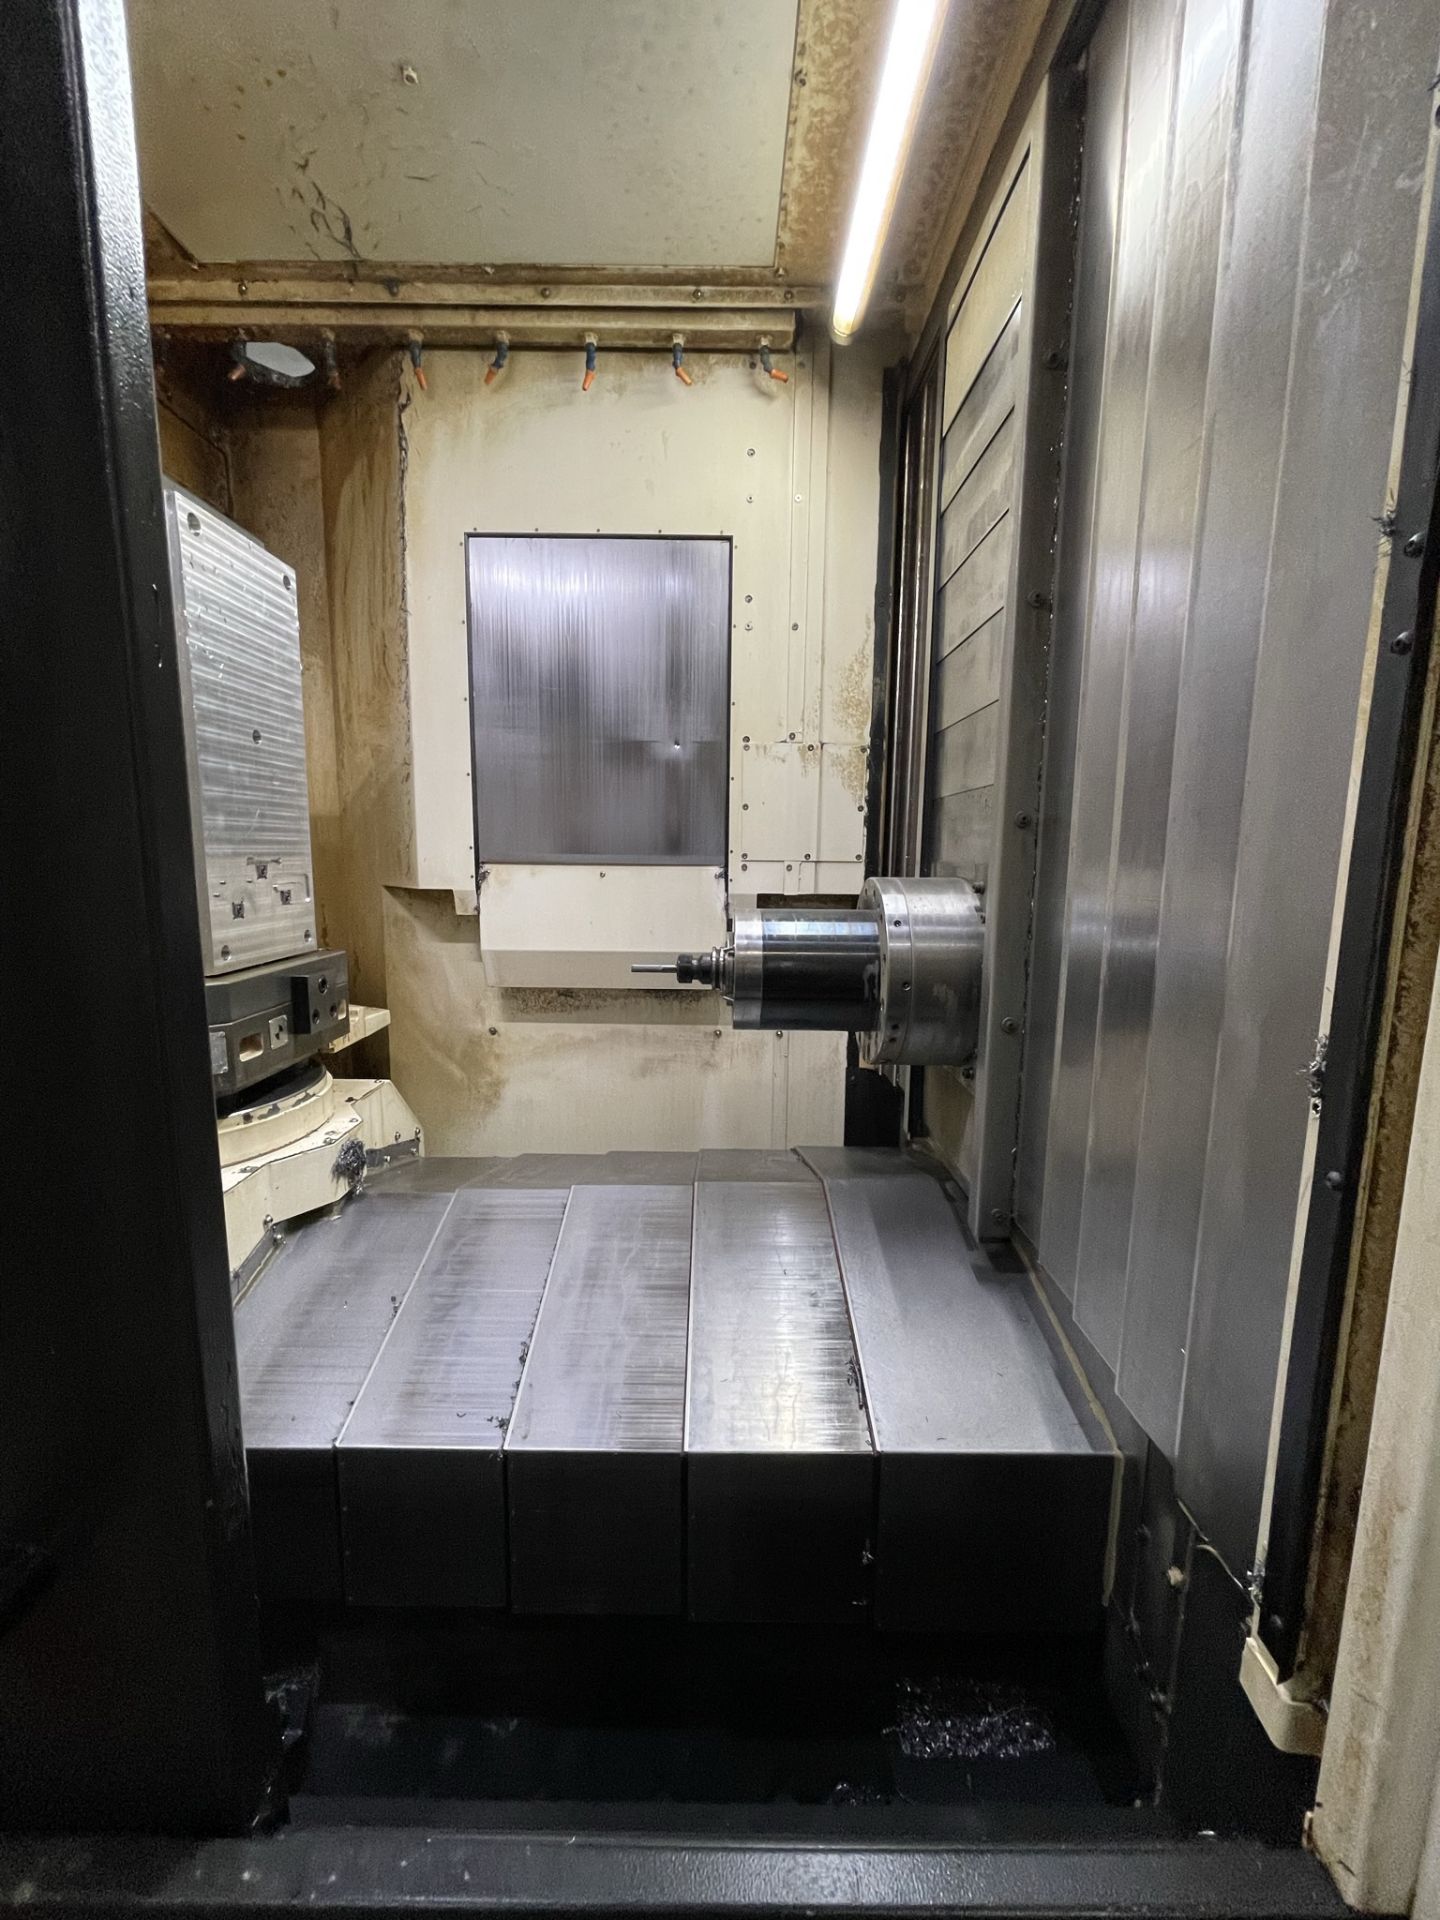 2013 Hyundai WIA HS4000i 4-Axis Horizontal Machining Center with Pallet Changer *1643 Cutting Hours* - Image 10 of 25